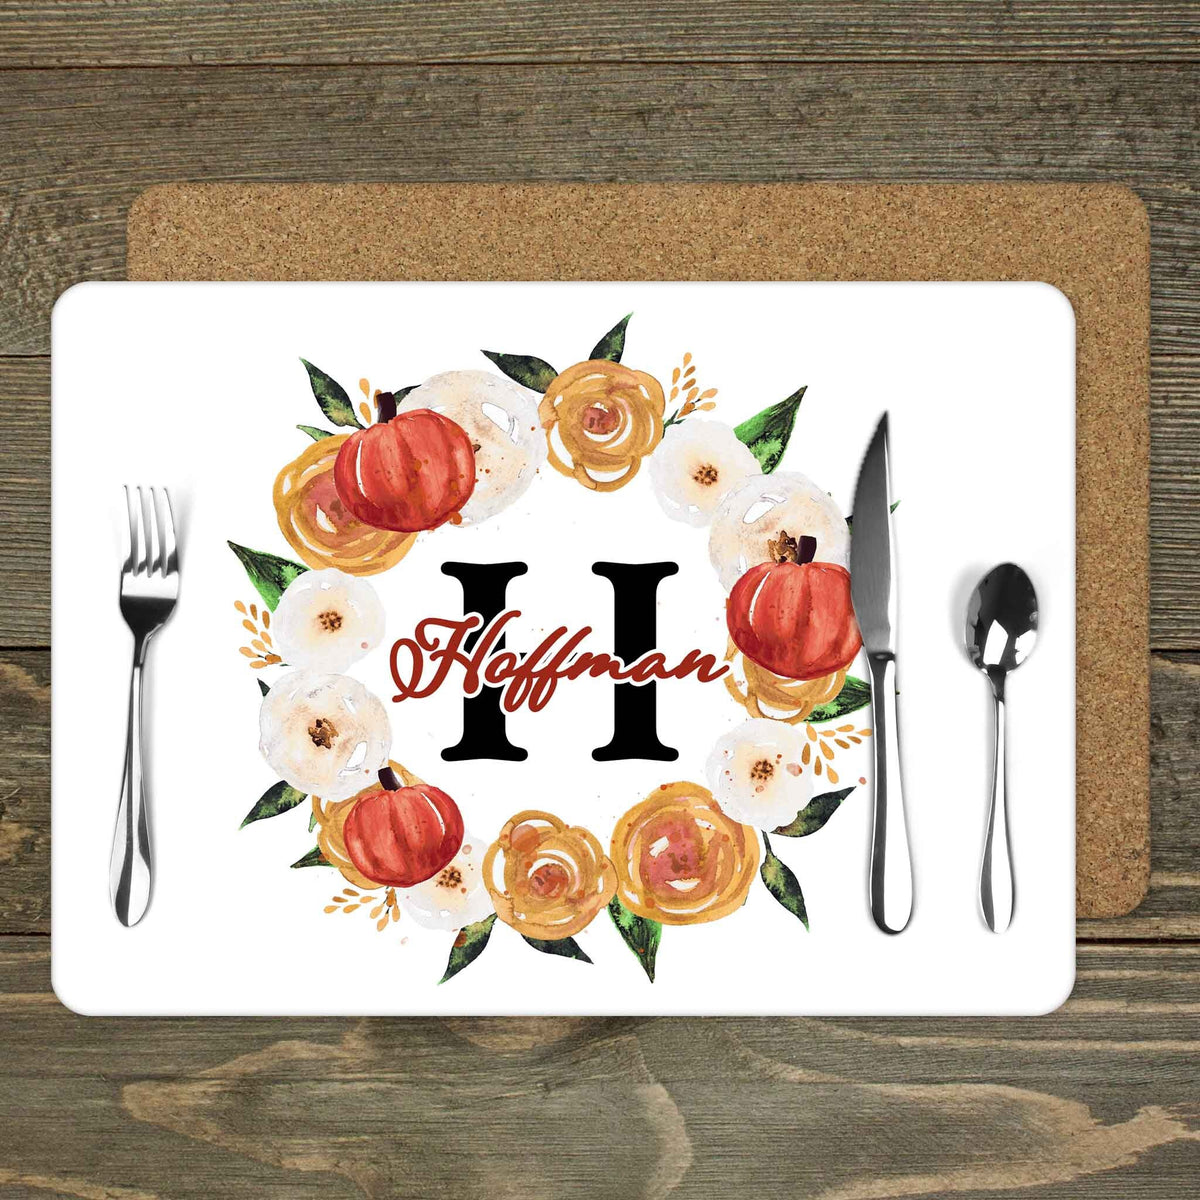 Custom Placemats | Personalized Dining and Serving | Fall Watercolor Wreath